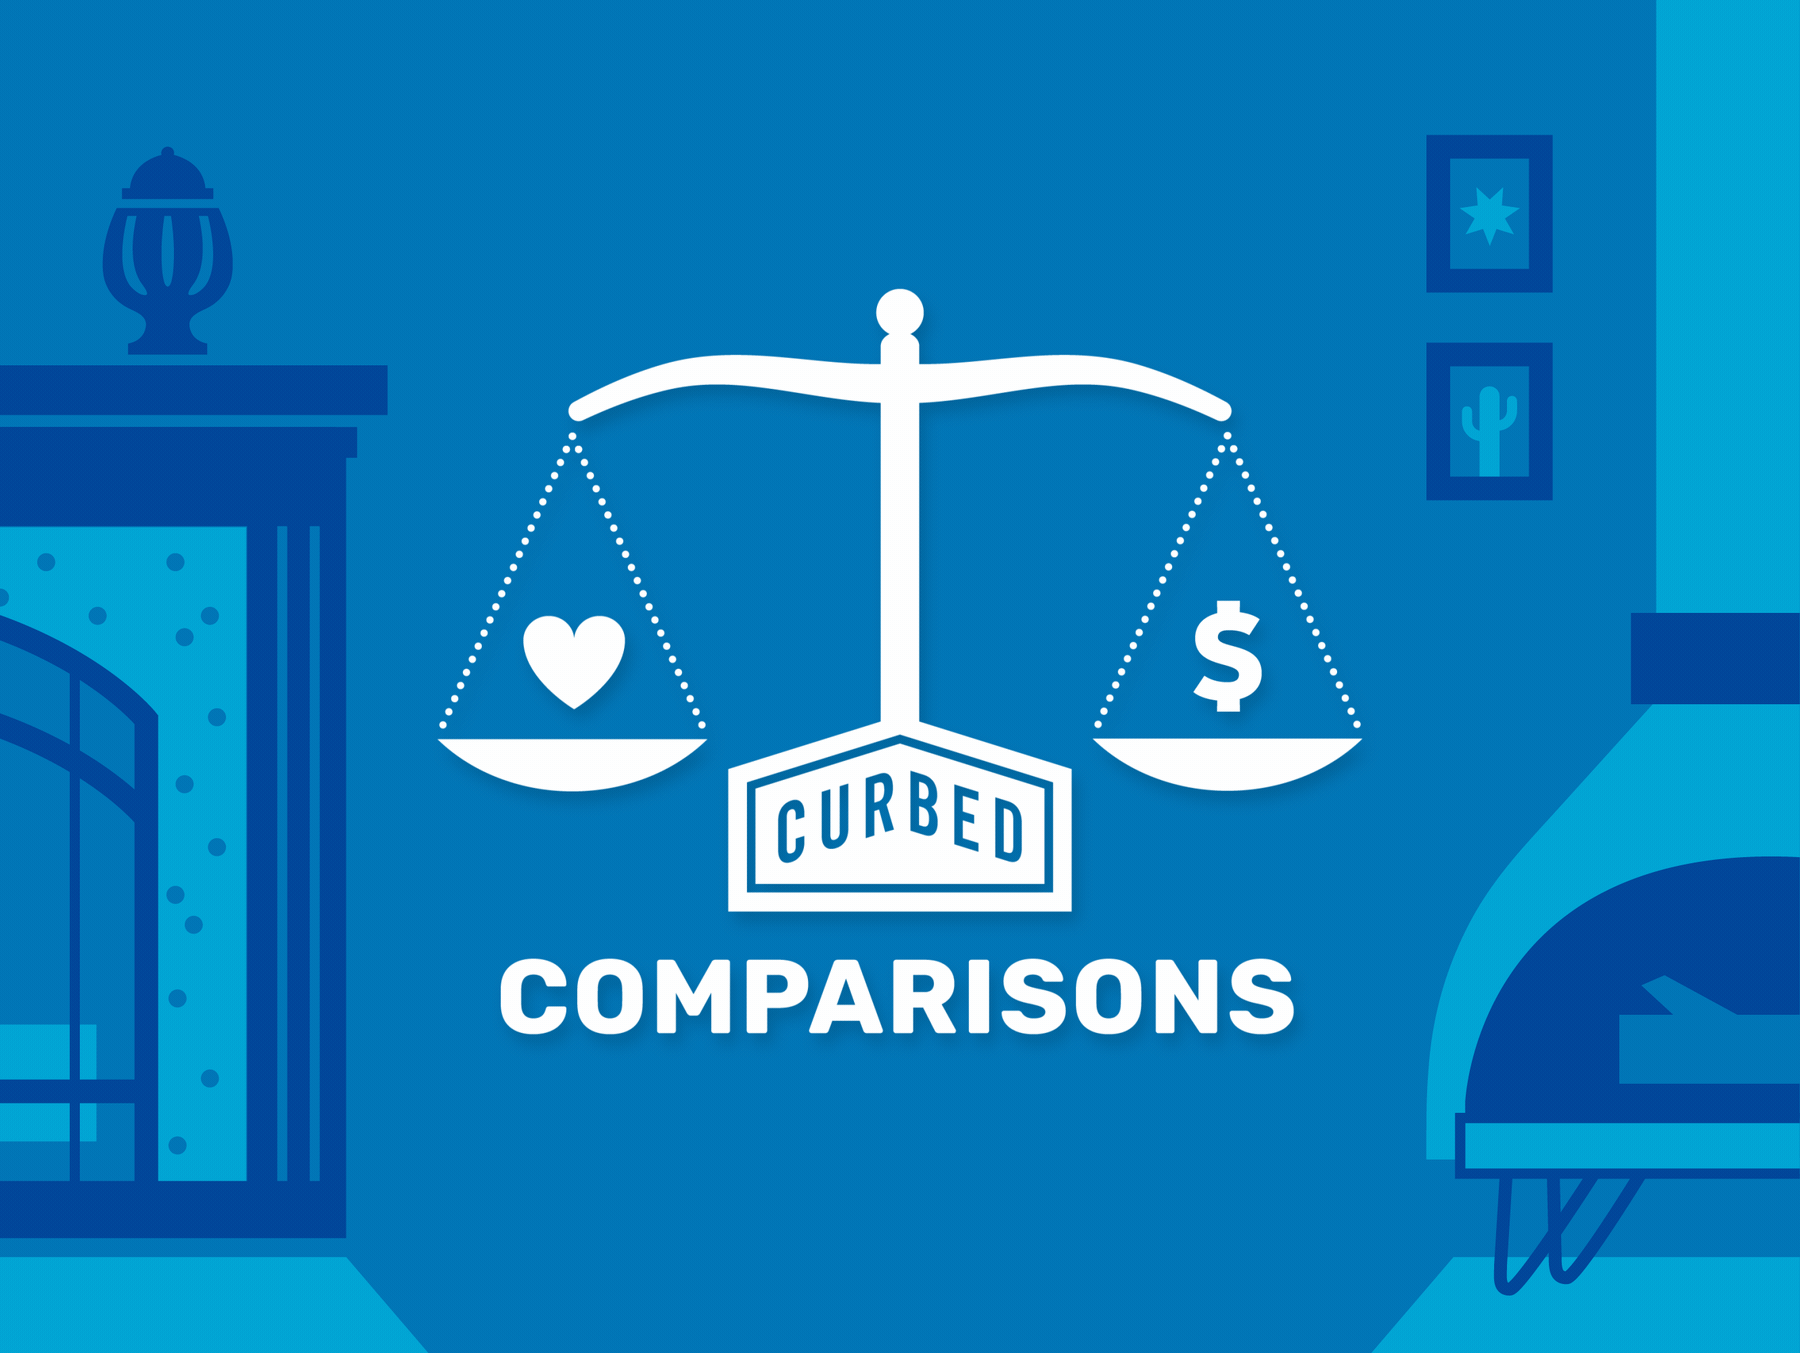 A blue illustration with an old-timey, two-basket scale in the middle with a heart on one side and a dollar sign on the other. On the left is a Craftsman-style fireplace with a mantel, and on the right is a midcentury-futurist fireplace with a conical bot